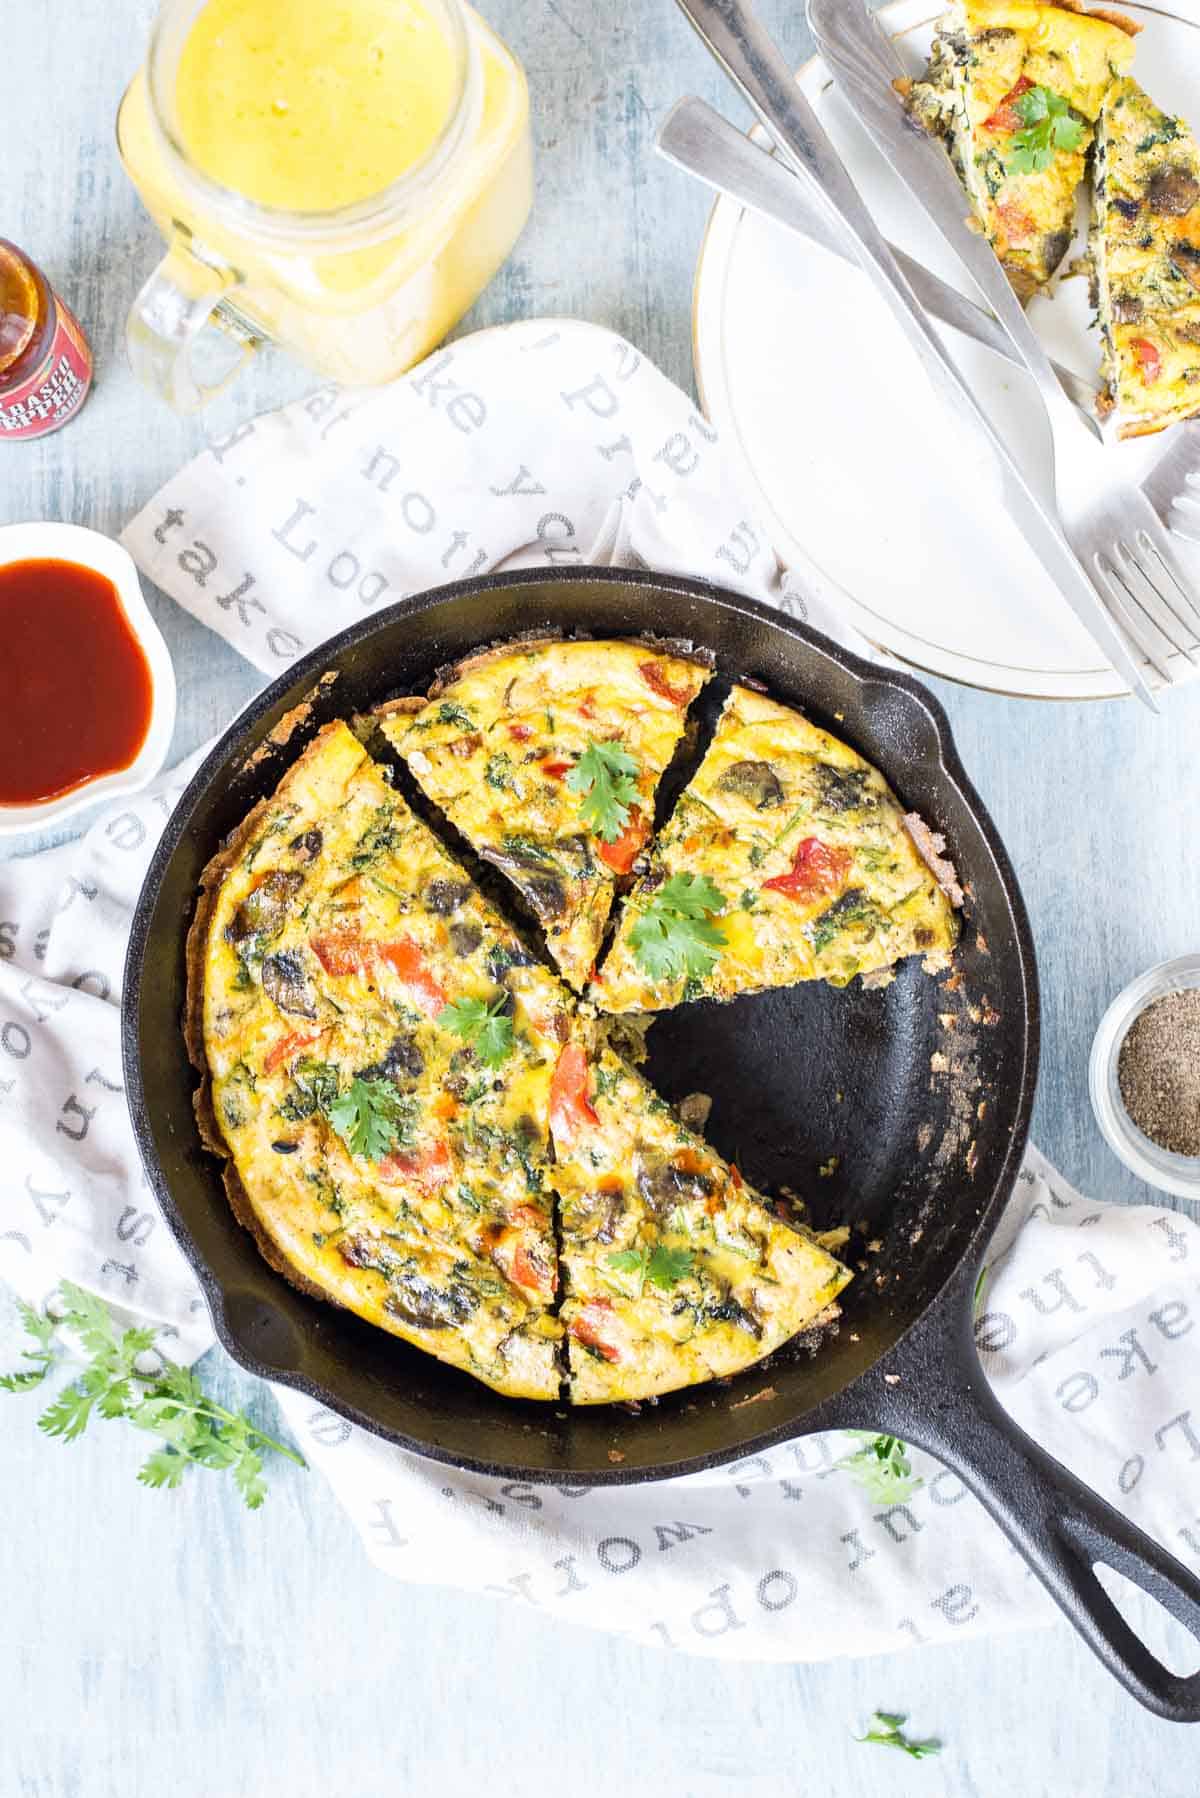 Slice of One Pan Indian Masala Omelette Frittata in a black pan